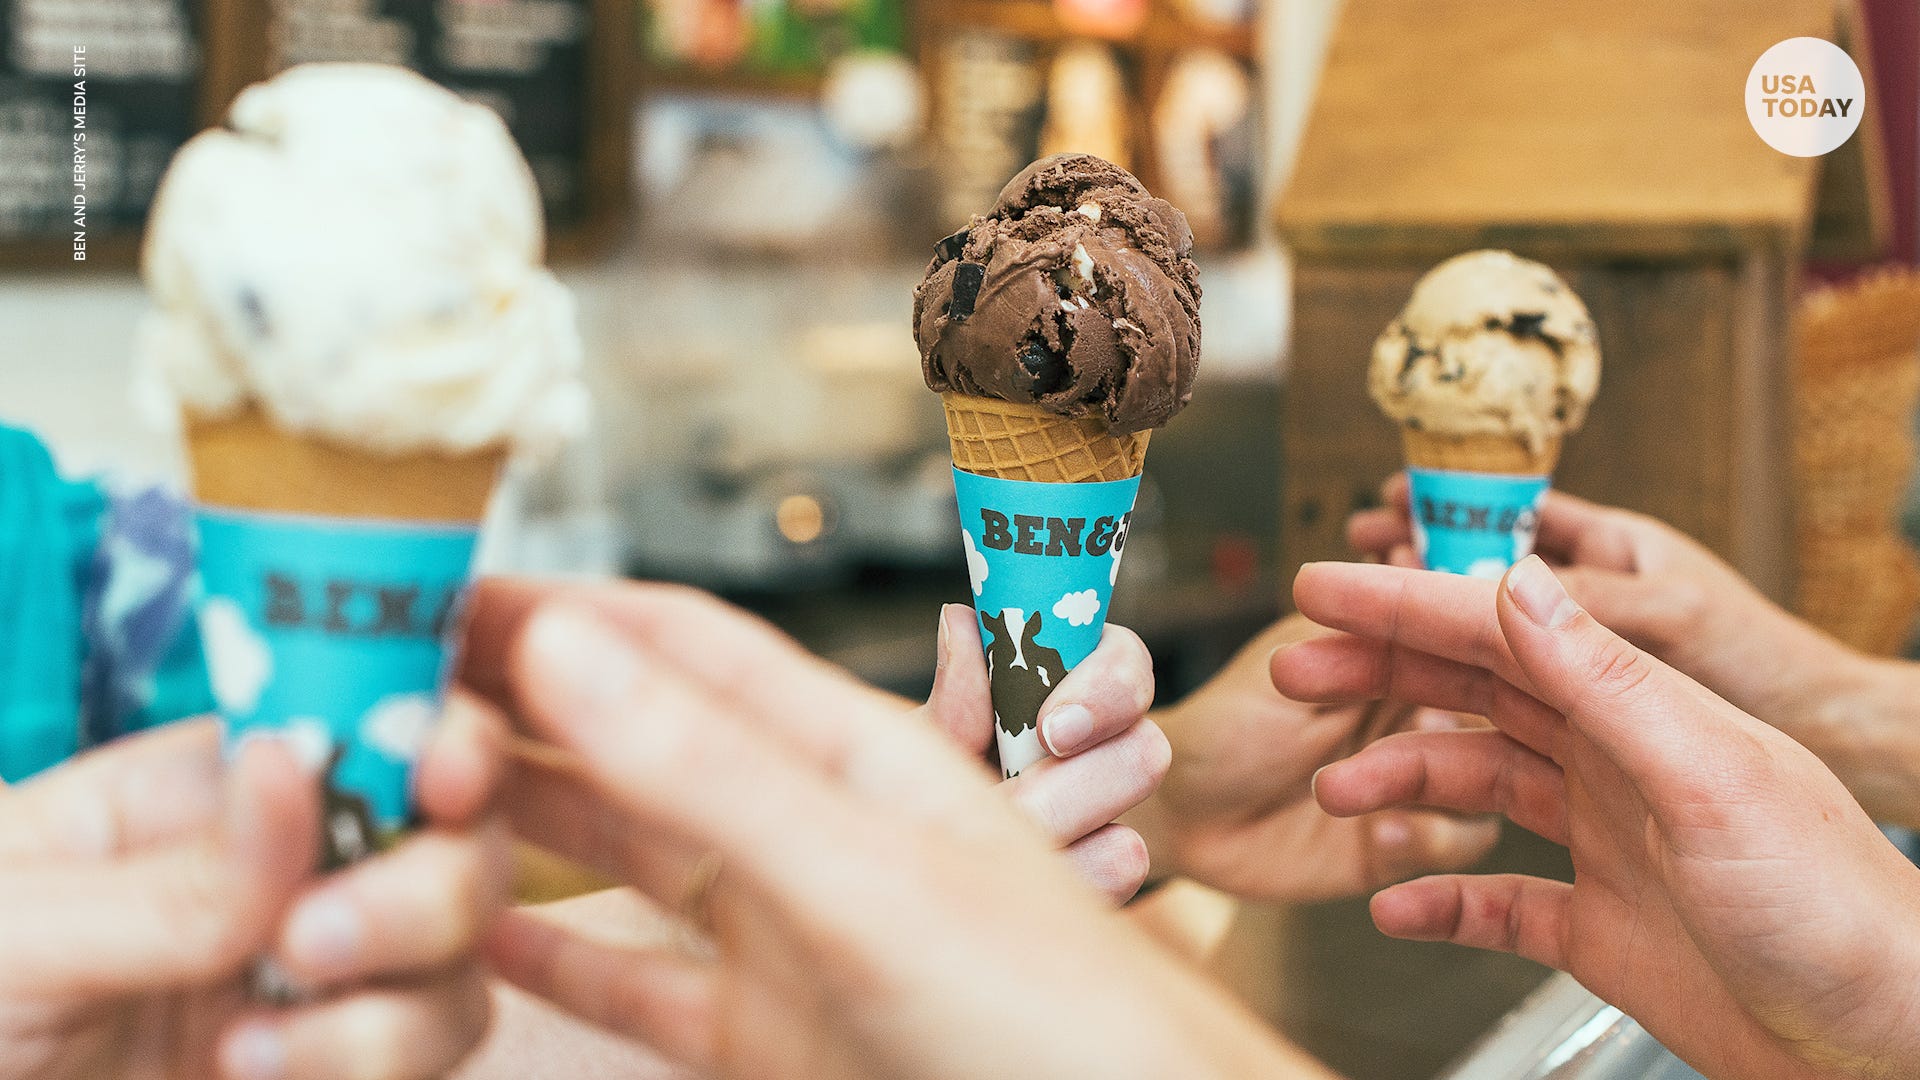 Ben & Jerry's calls for dismantling of 'culture of white supremacy'